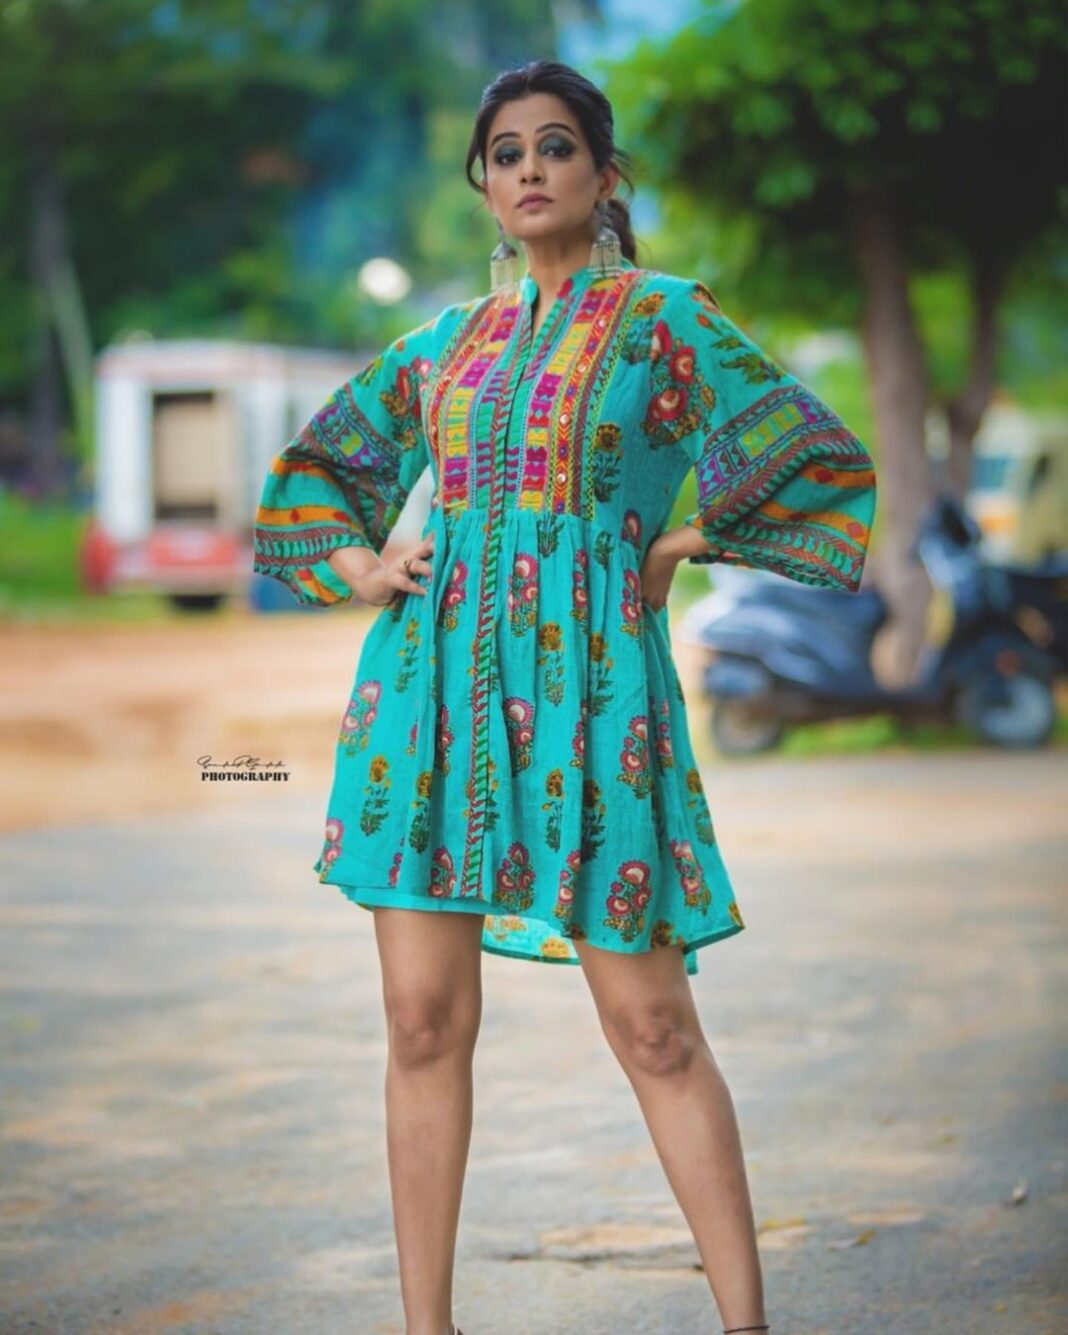 Priyamani Instagram - Thank you my louuuuuu @mehekshetty for styling me so well in this gorgeous dress by @ritukumarhq !! These gorgeous Earrings courtesy my favourite @bandhanemporio ❤️❤️!! Thank you my dearest @sandeepgudalaphotography for these amazing pictures 🤗🤗🤗❤️❤️❤️❤️..makeup and hairstyle by my favourites @pradeep_makeup and @shobhahawale ❤️❤️.. assisted by @kakarla.p .. #dheechampions #etv #lovemyjob #dontmissathing